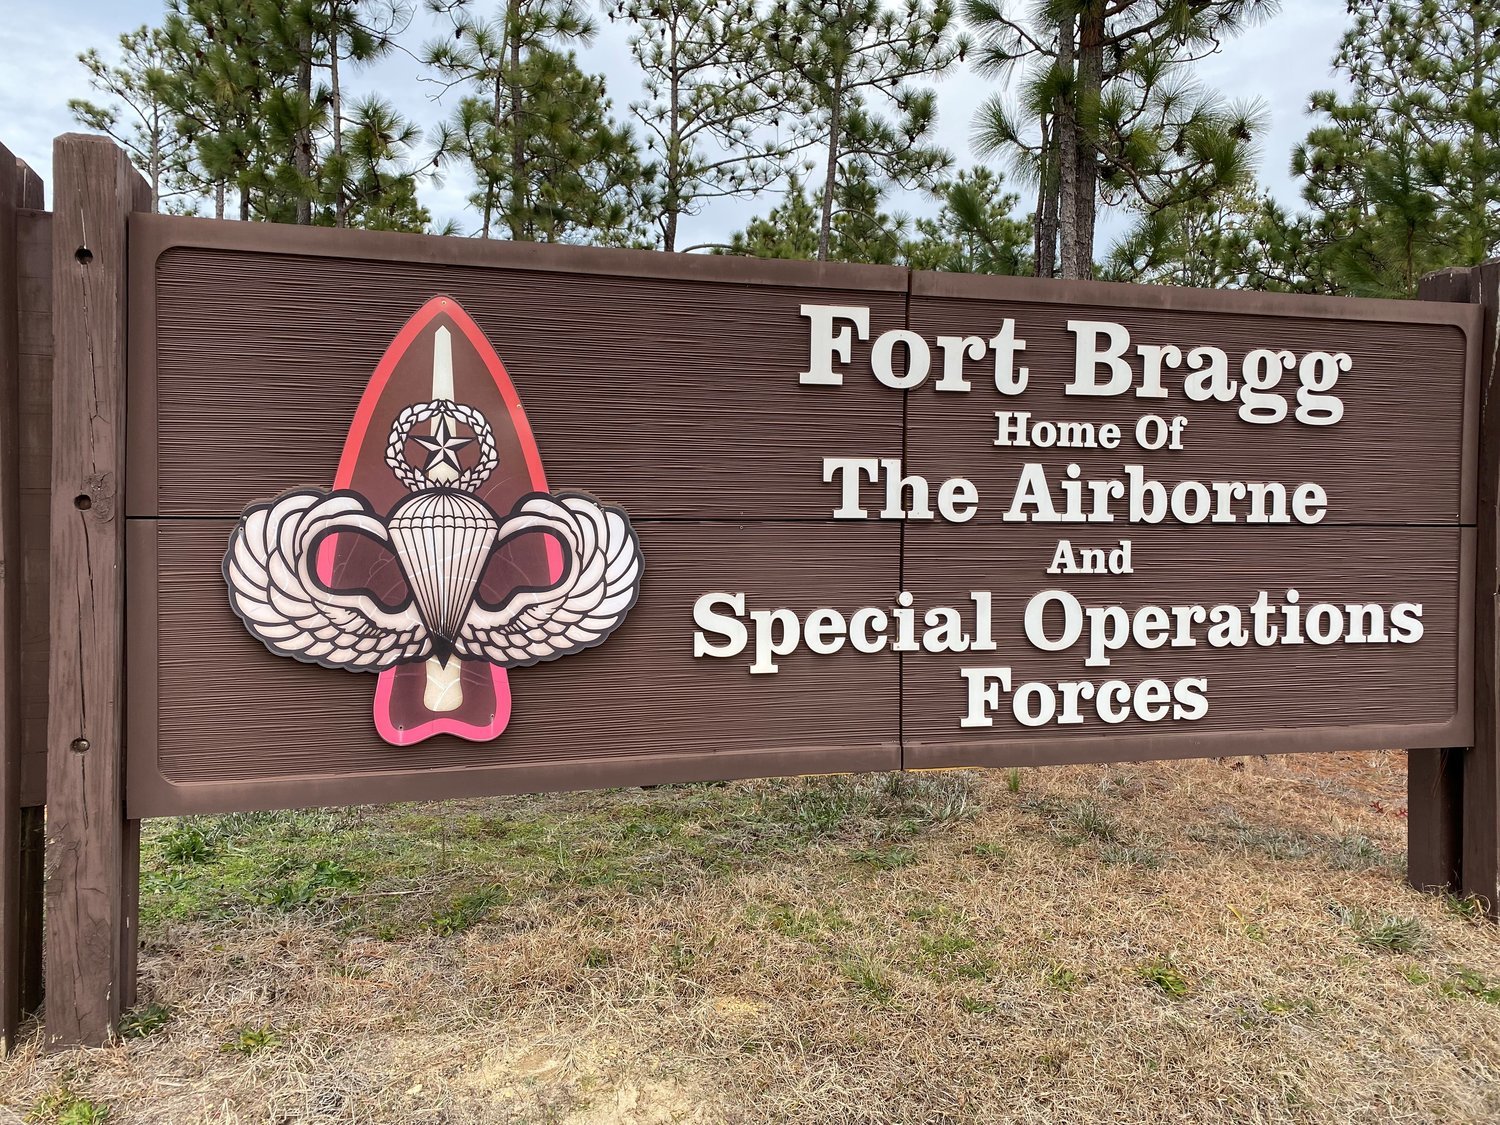 Up to 1,200 Fort Bragg soldiers will be relocated because their barracks don’t meet HVAC standards, post officials said.